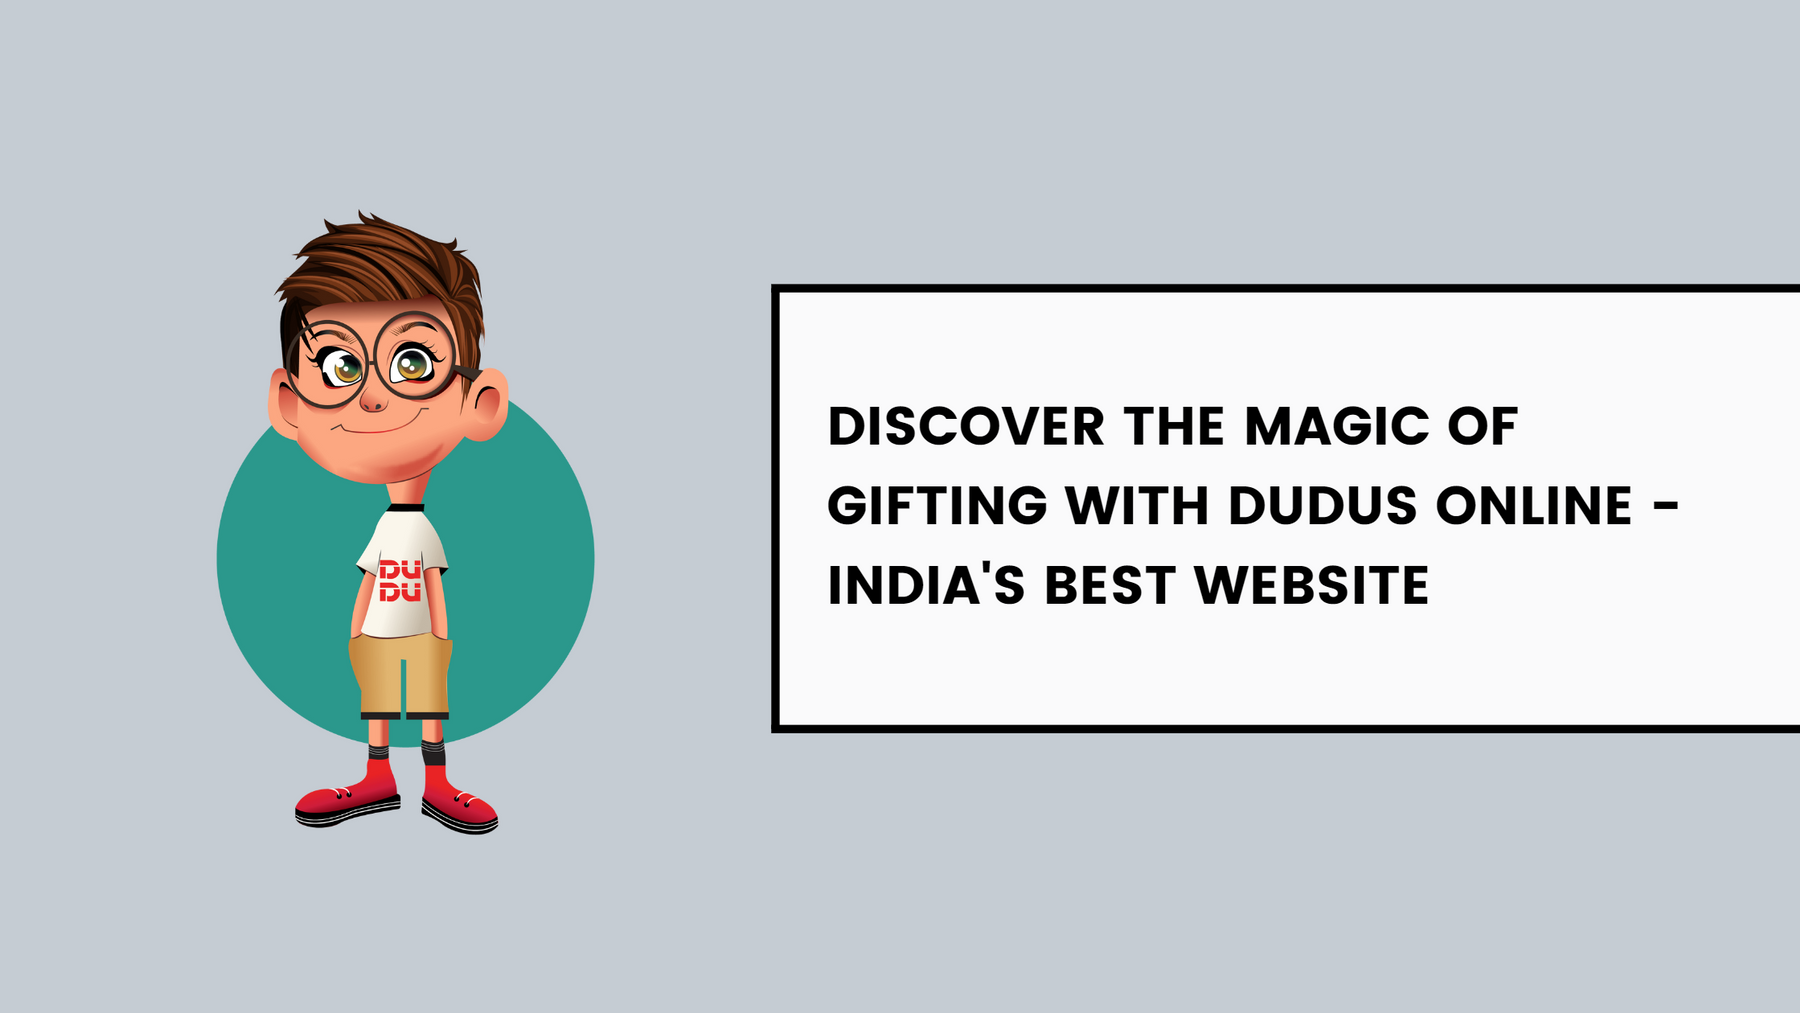 Discover The Magic Of Gifting With Dudus Online - India's Best Website